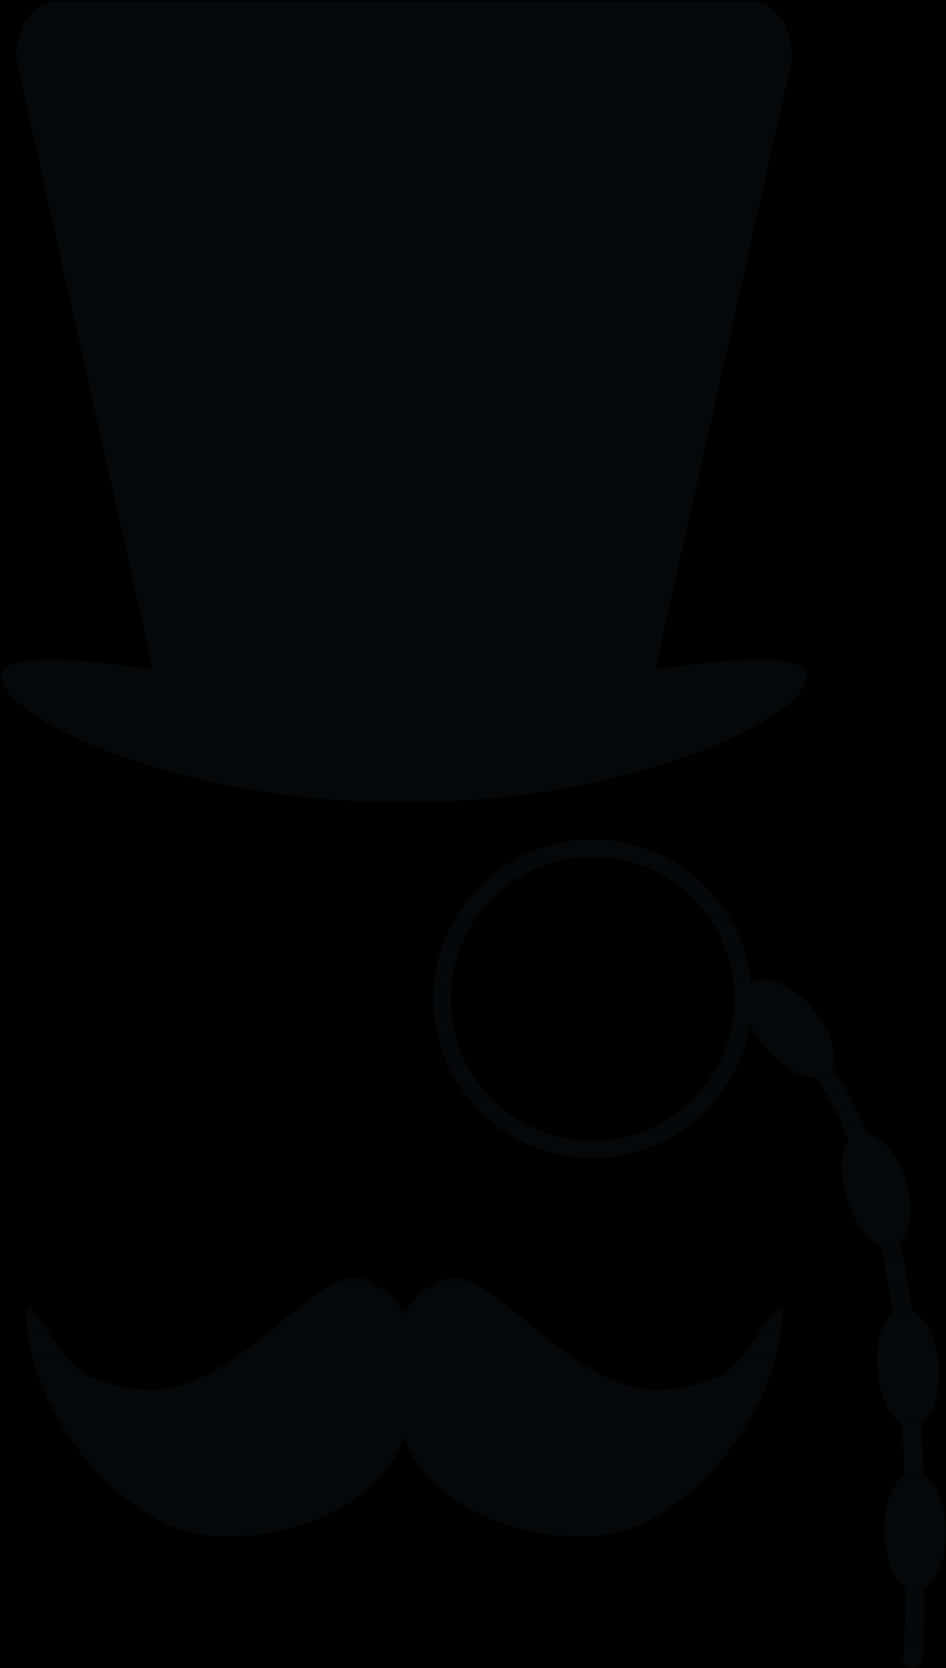 A Silhouette Of A Hat And A Cup